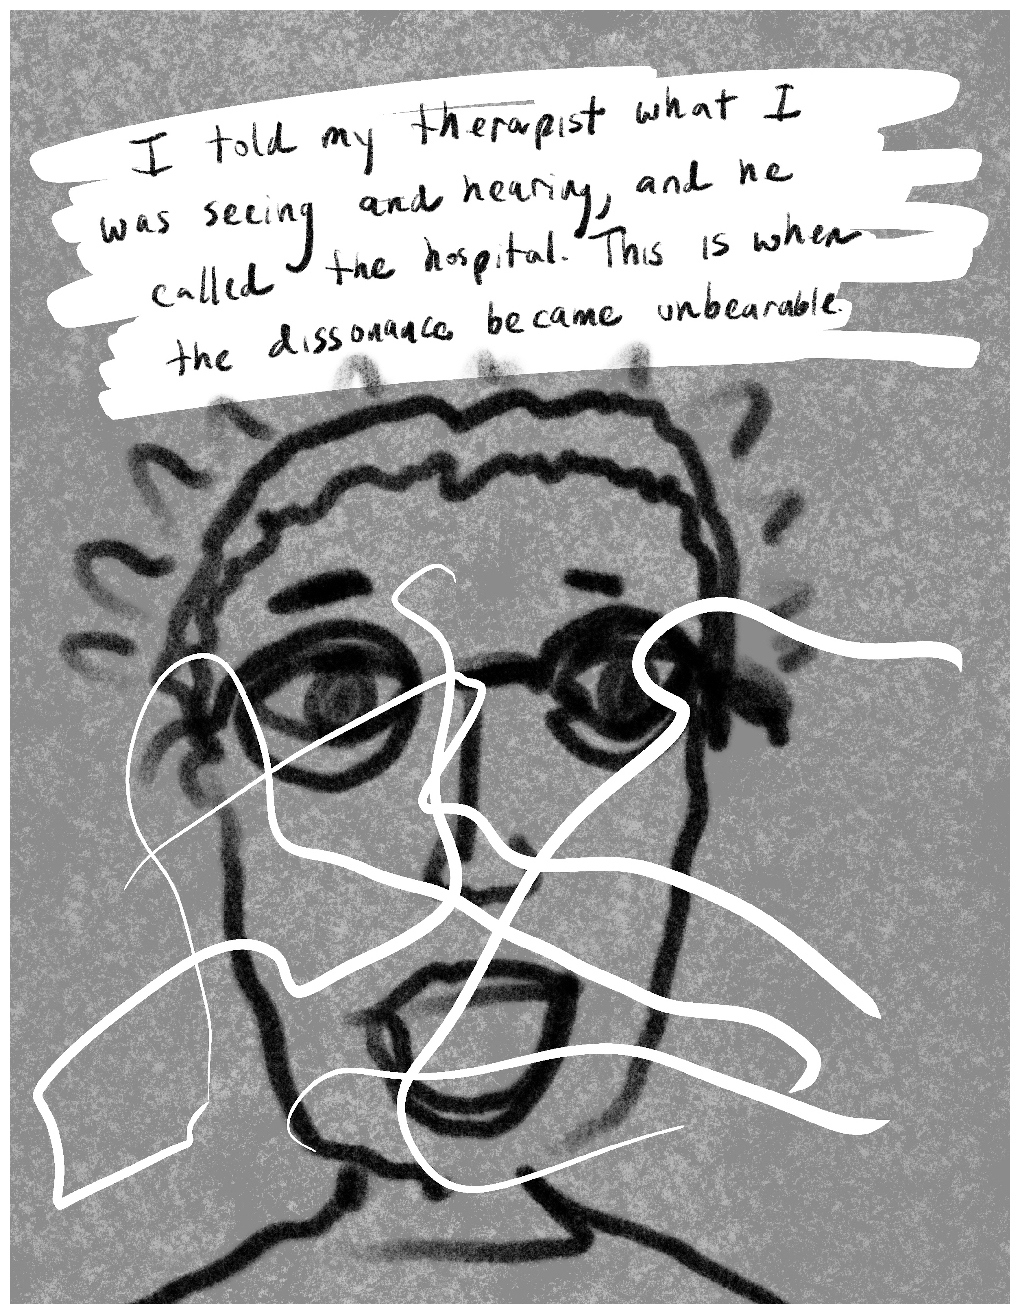 Panel 2 of a four-panel comic called 'I was hallucinating', consisting of thick black line drawing on a mottled grey background. The crudely drawn face of a young person with glasses, short hair and an open mouth looks out at the viewer. A wavy black line surrounds the top of the head like a halo. White lines of scribble are randomly drawn across the panel, cutting across the face. At the top of the panel hand-written text against a white background reads: "I told my therapist what I was seeing and hearing, and he called the hospital. This is when the dissonance became unbearable."